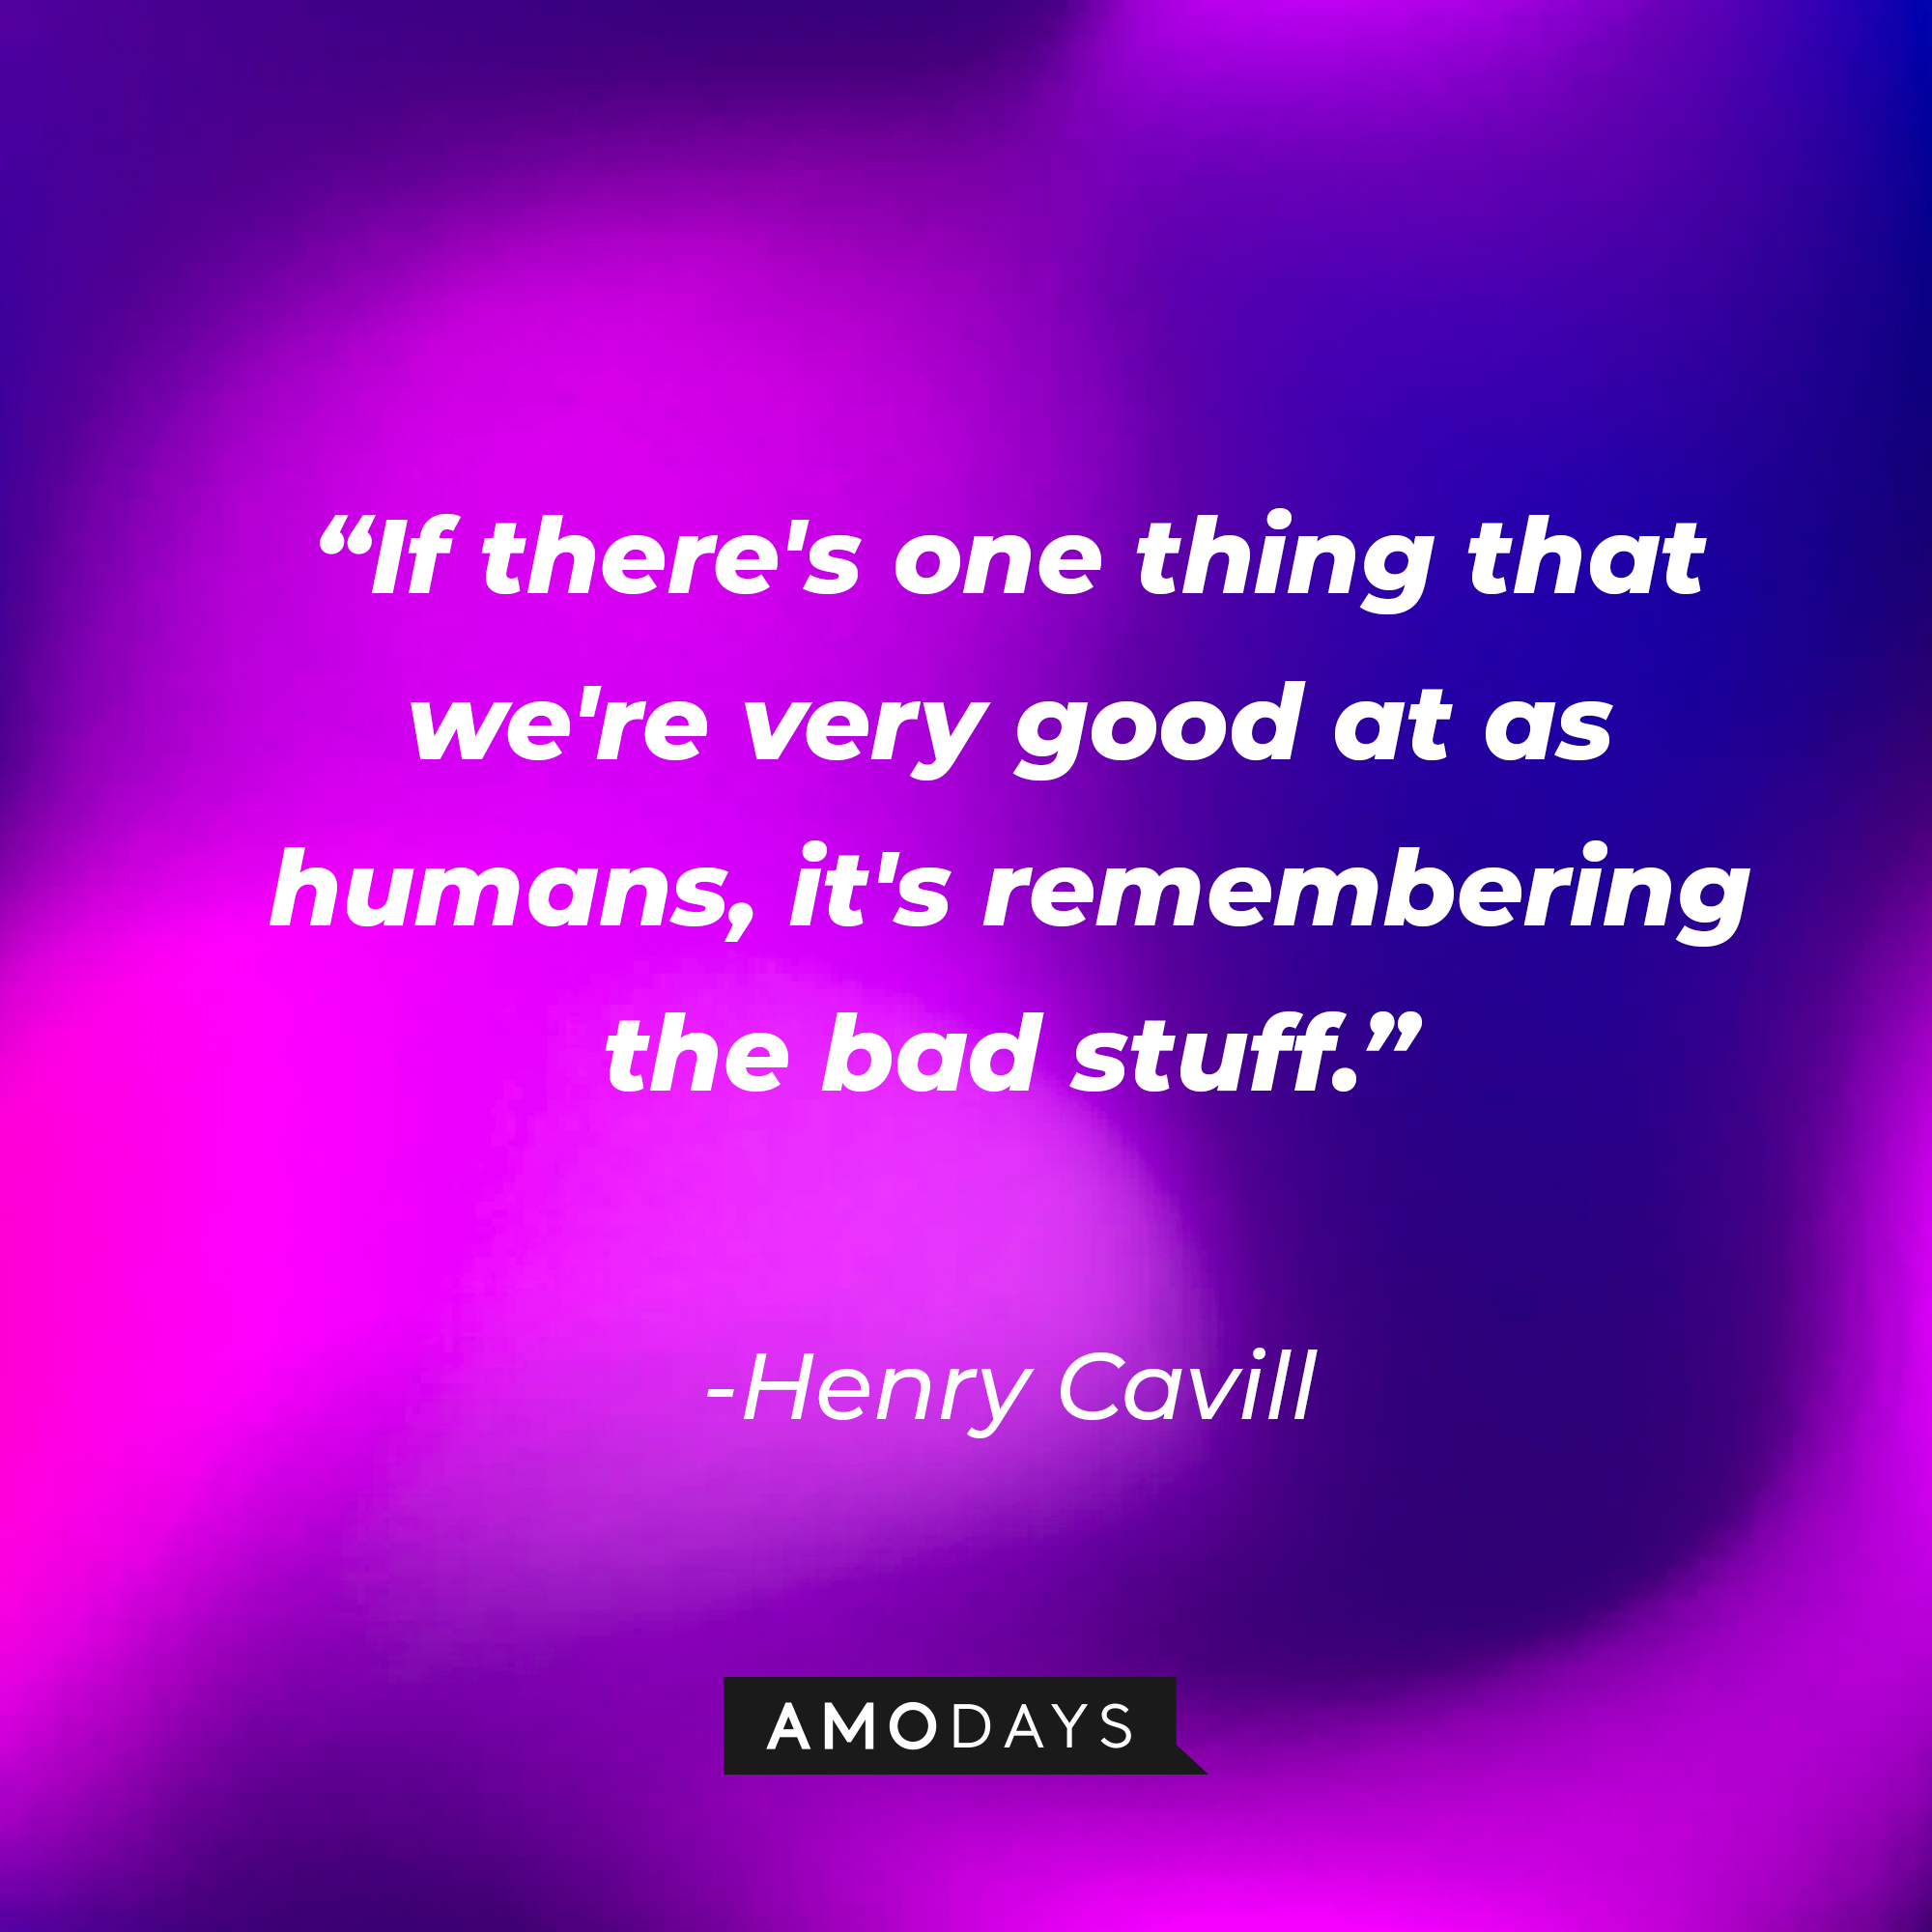 Henry Cavill’s quote: “If there's one thing that we're very good at as humans, it's remembering the bad stuff.”  | Source: AmoDays